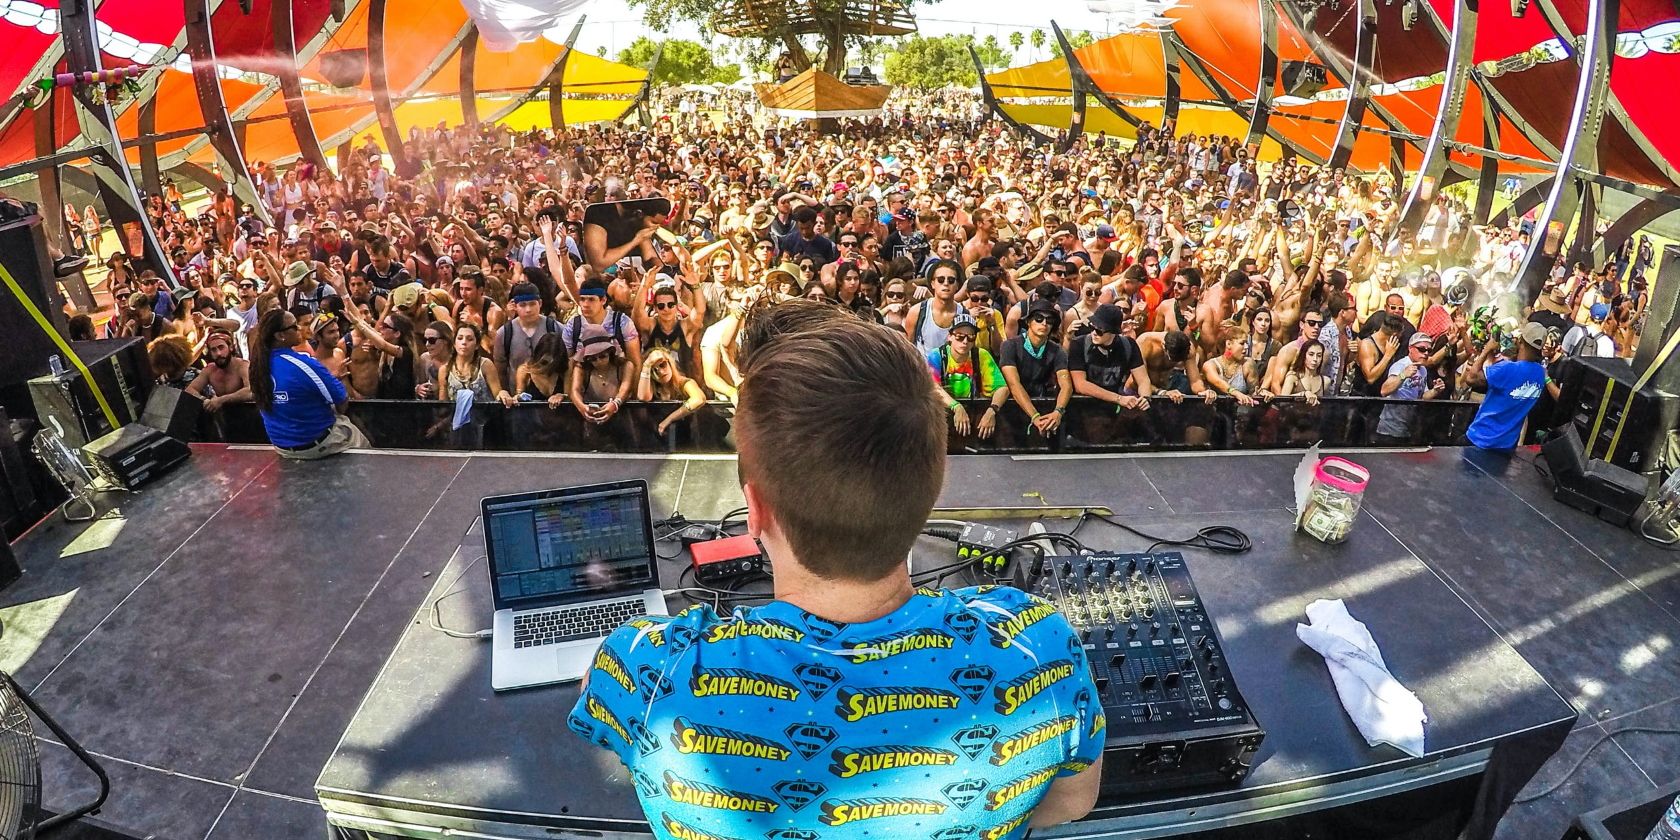 DJ in front of a crowd